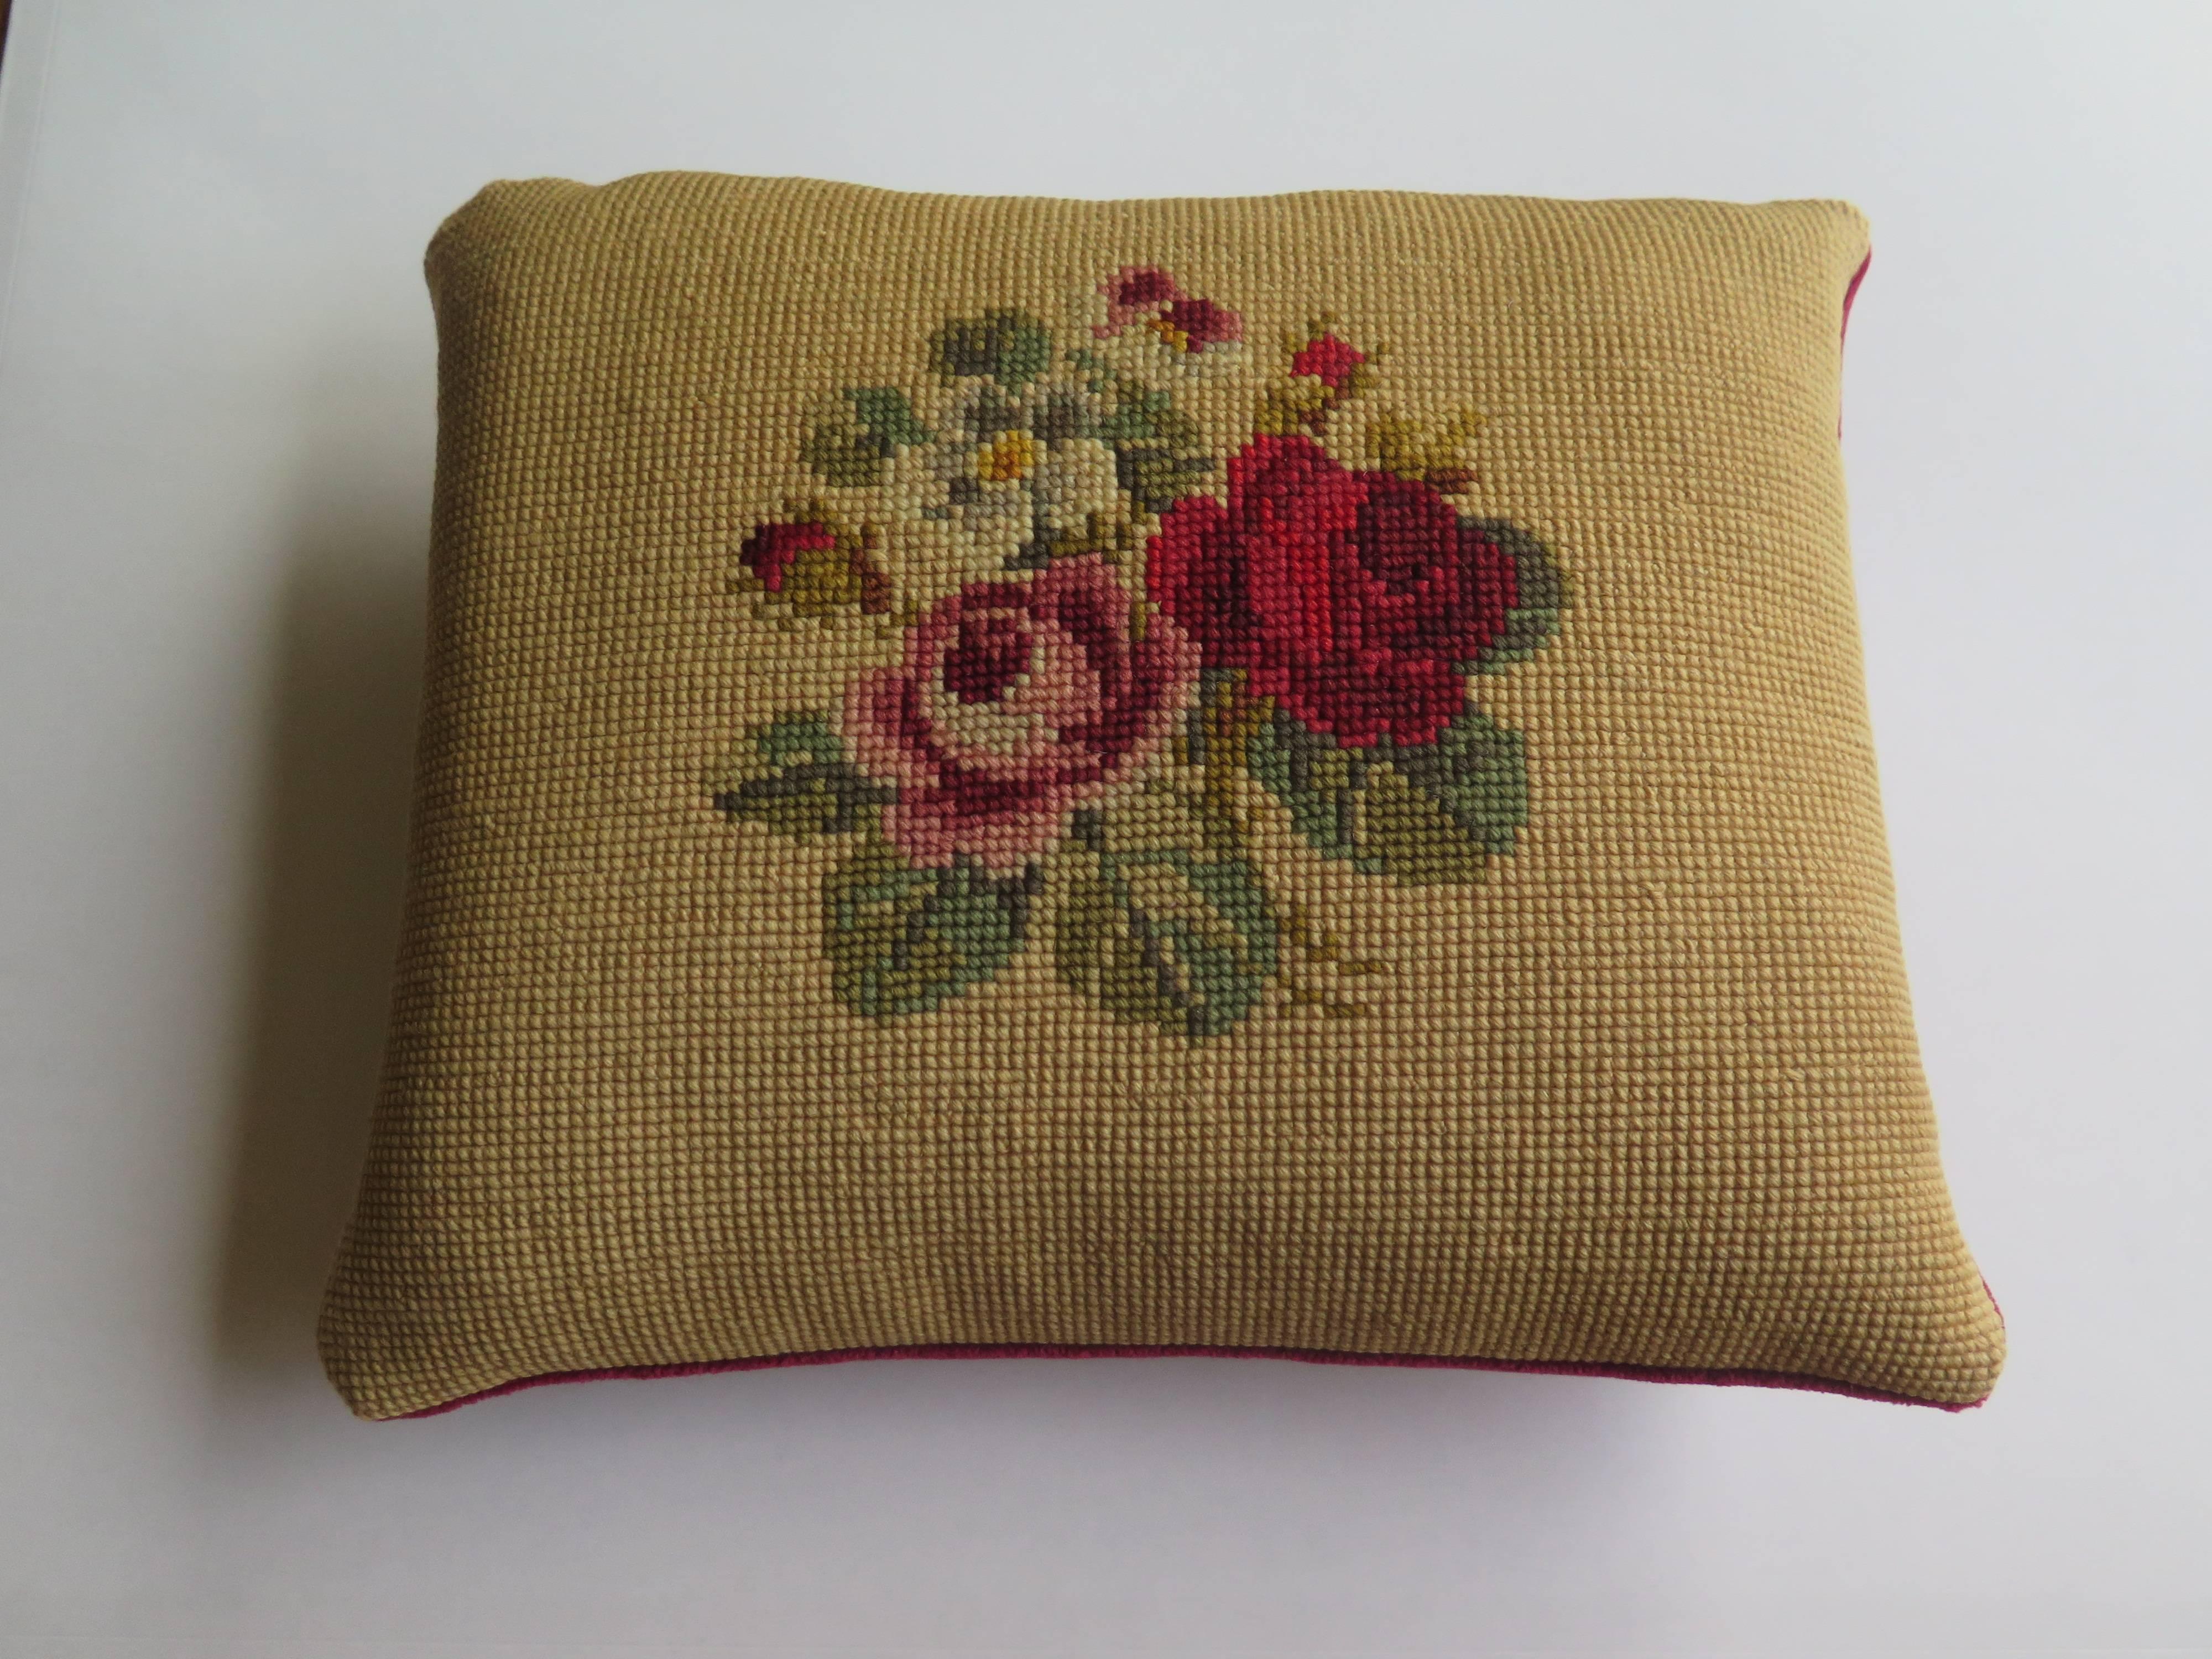 This is a small size, English, Art Nouveau inspired, Victorian needlepoint tapestry cushion or pillow from the late 19th century. 

The hand worked design shows rich red, plum and soft pink rose plumes with green foliage on an old gold background